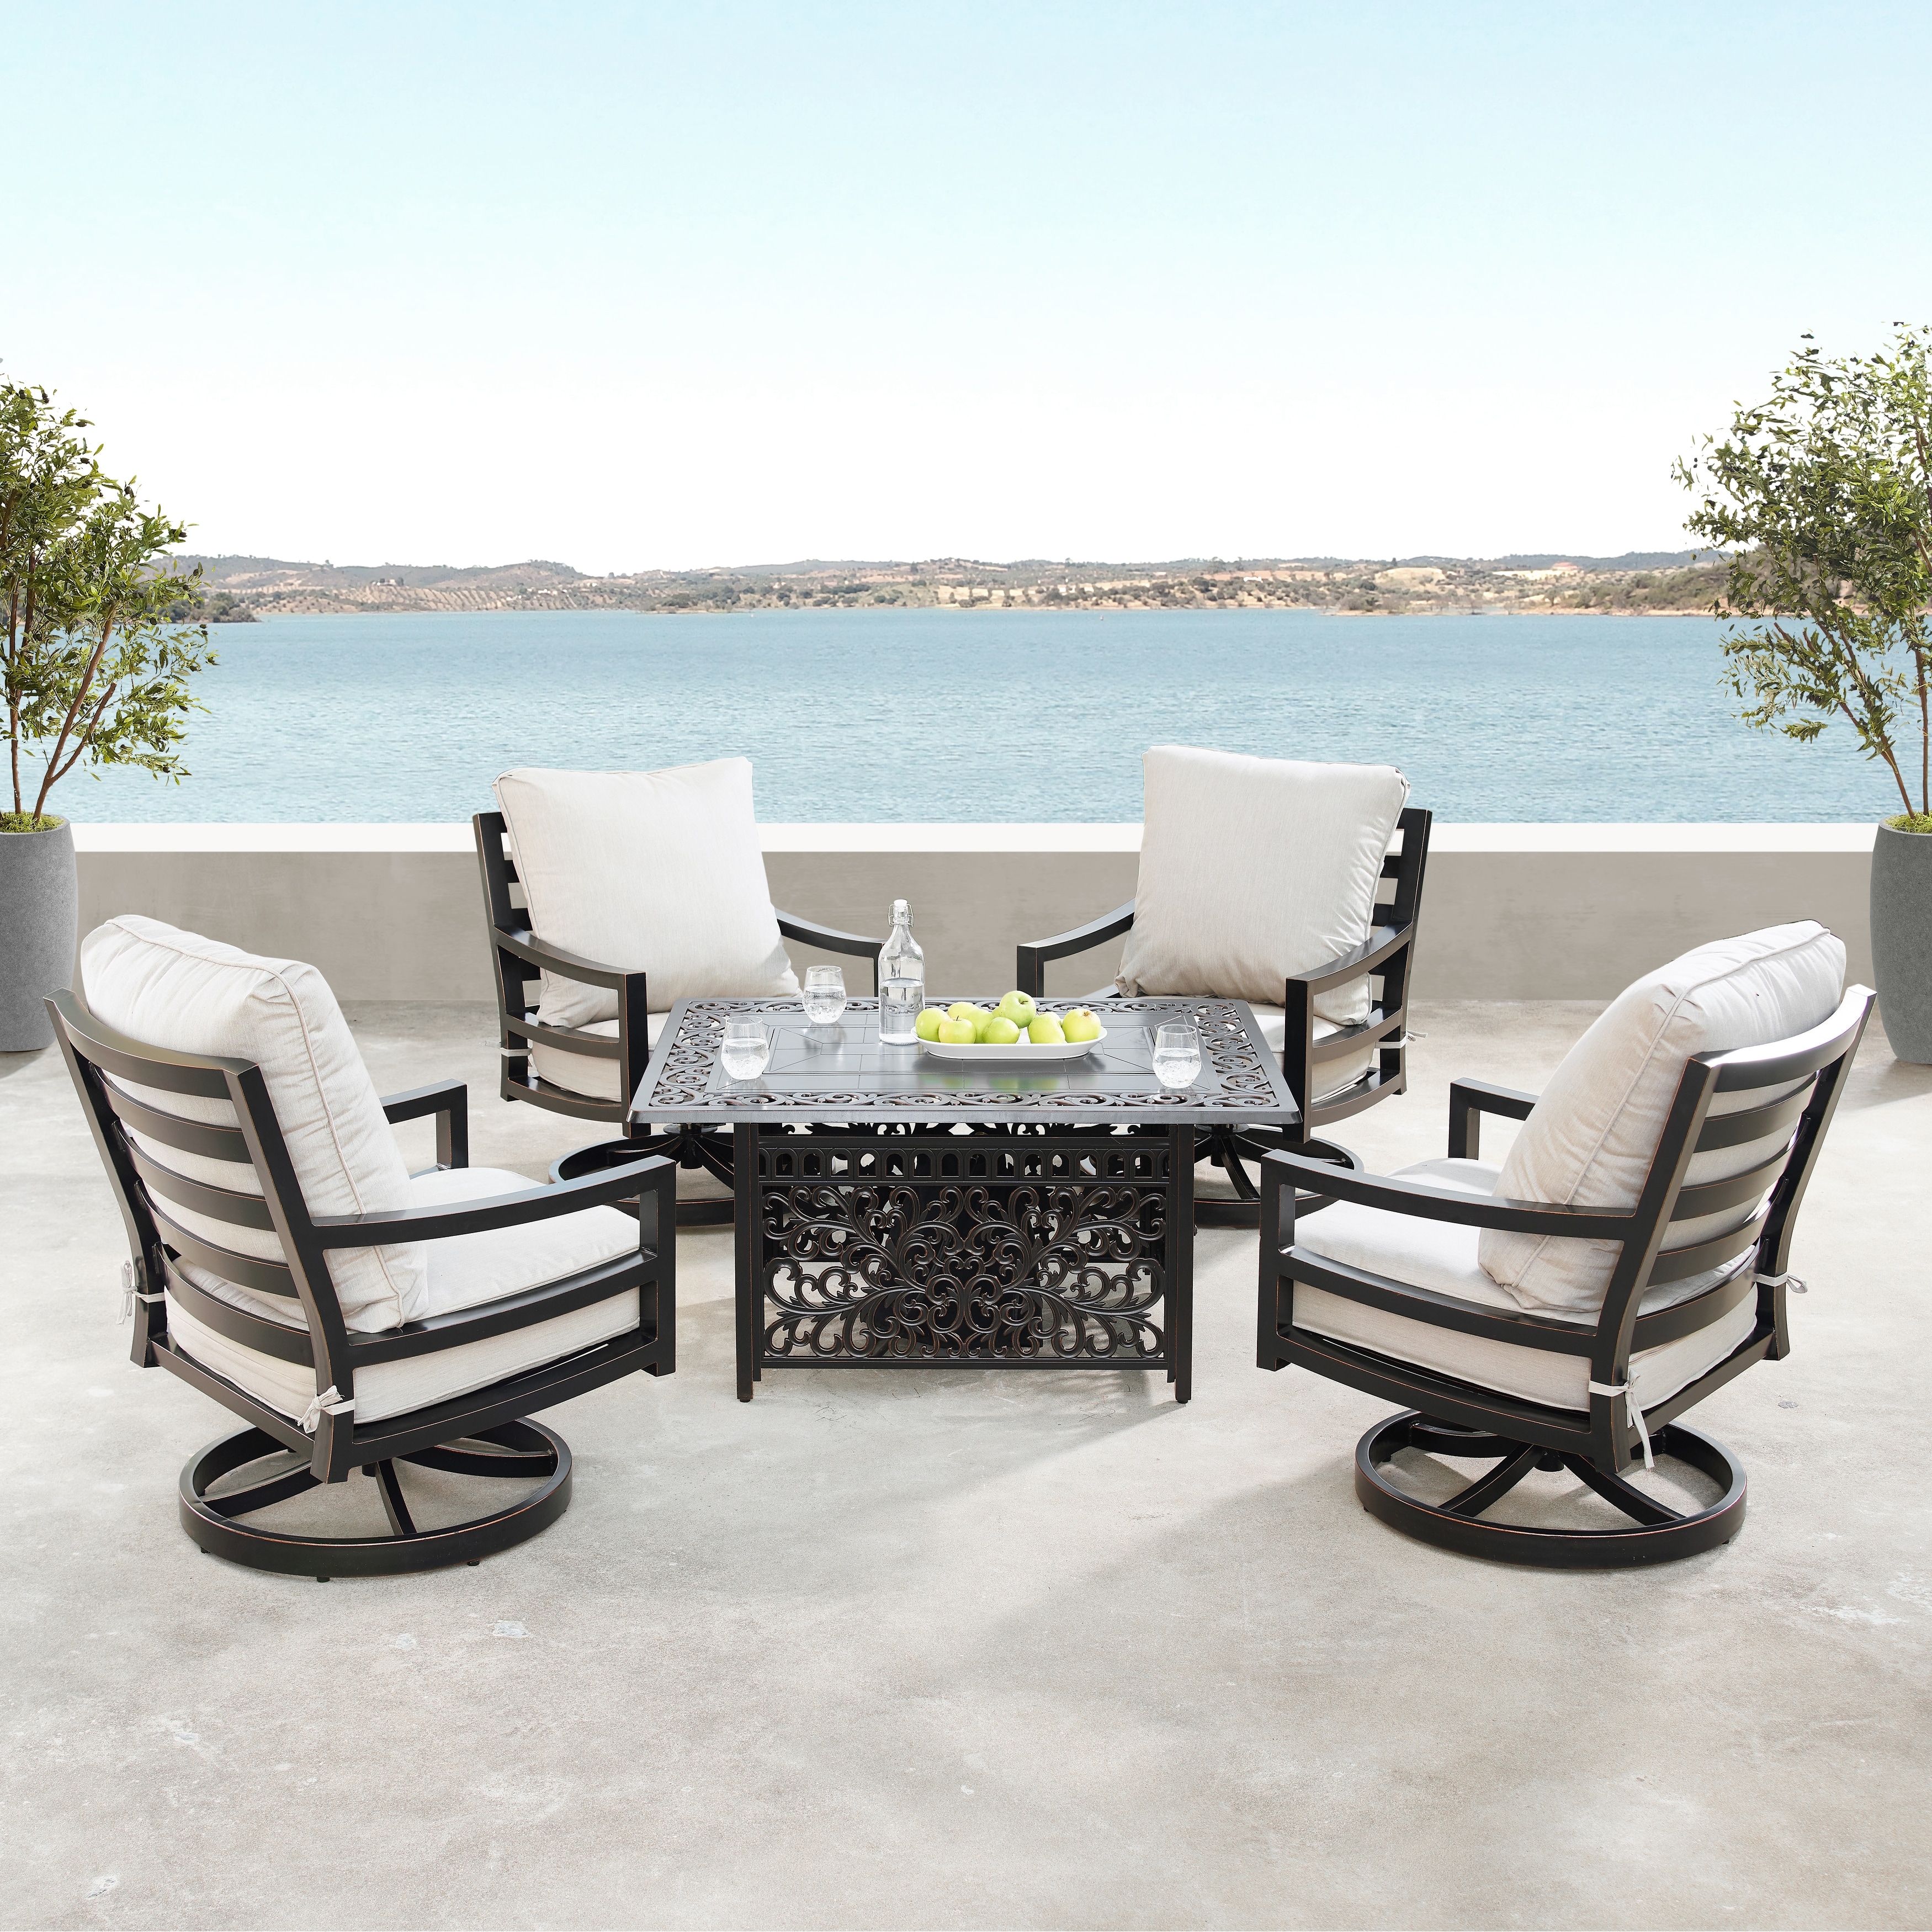 Aluminum 48in Fire Table Set With Four Swivel Rockers and Accessories